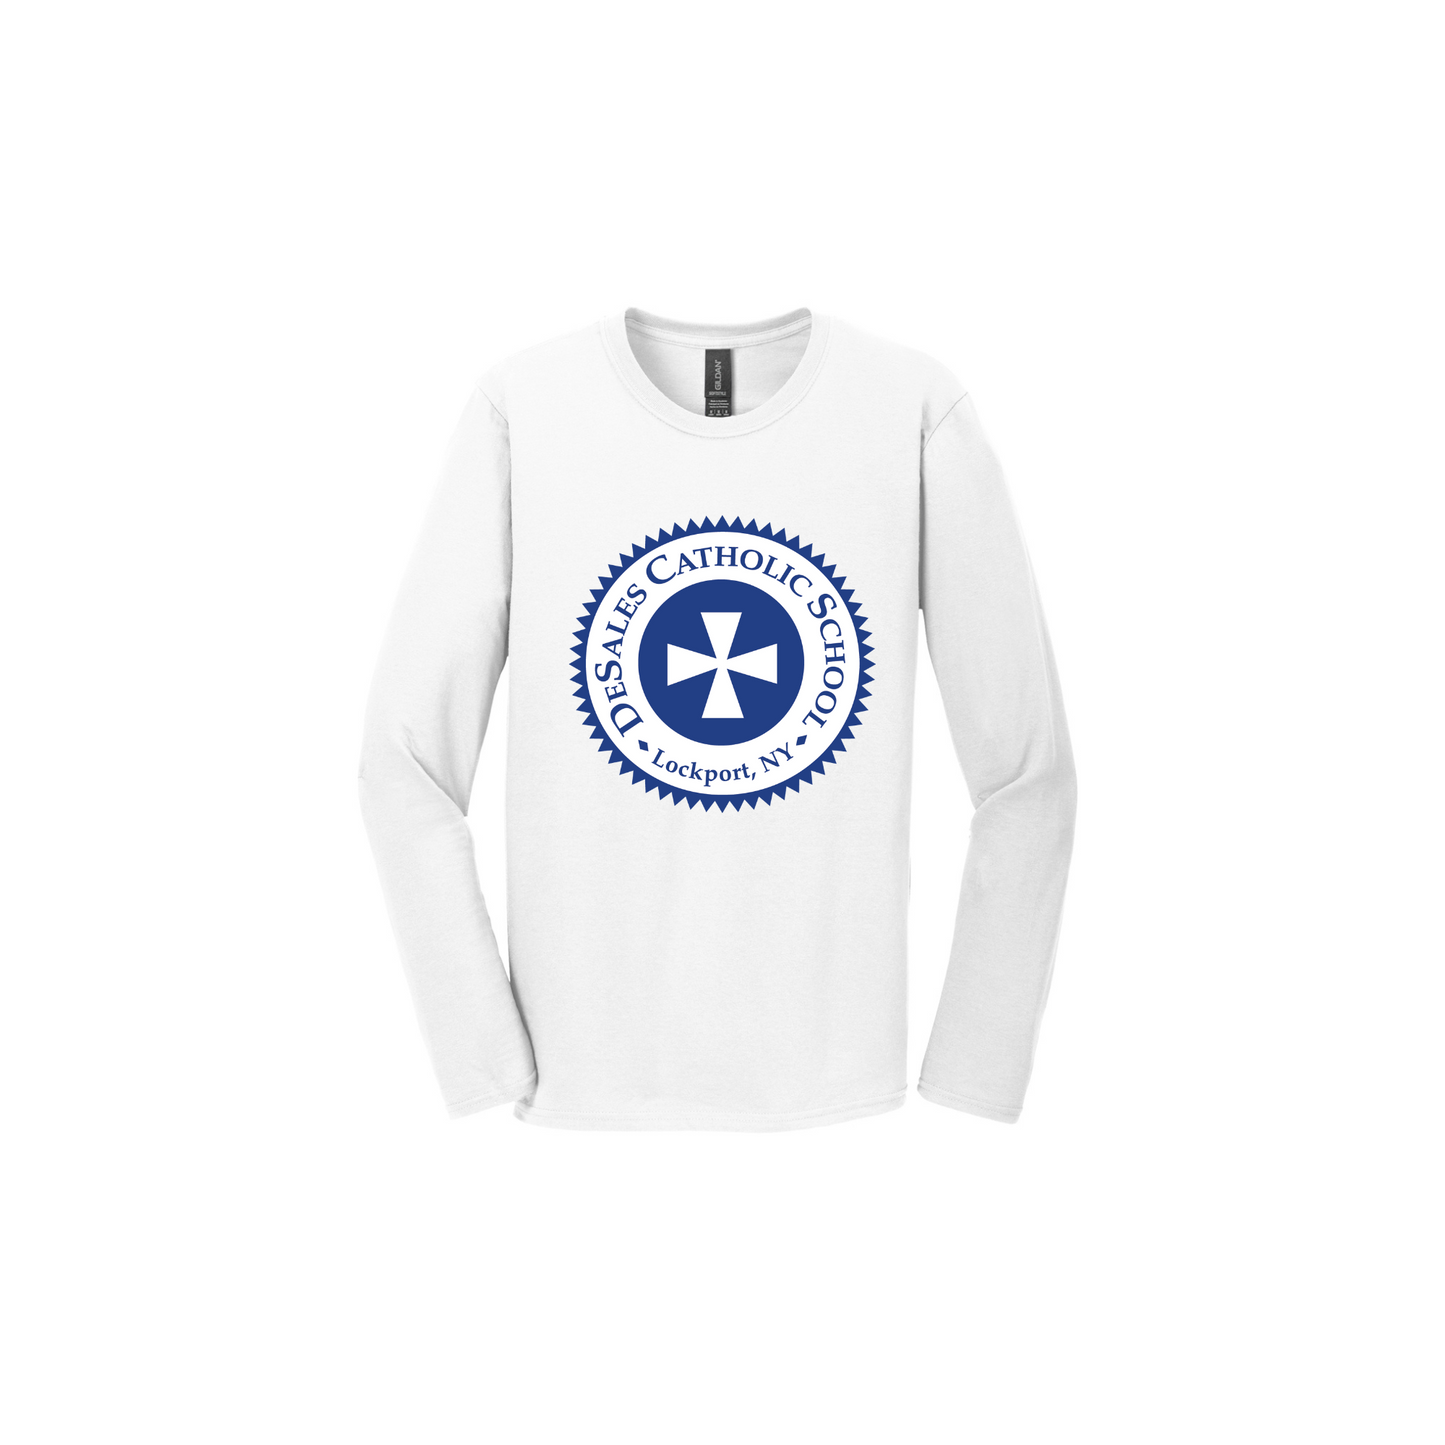 Youth and Adult Long Sleeve T-shirt